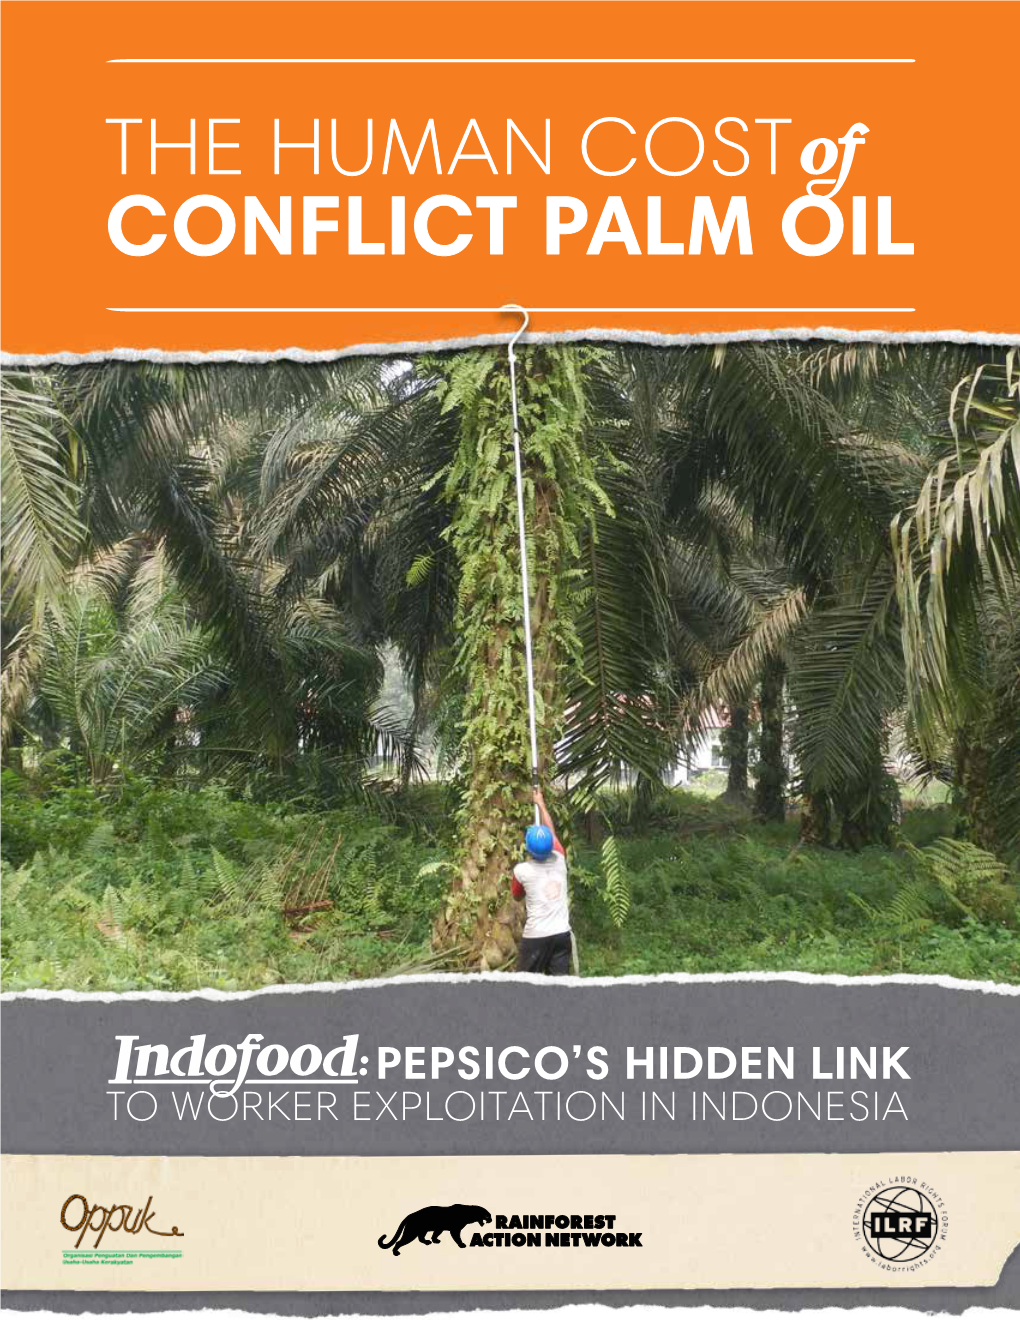 The Human Cost of Conflict Palm Oil: Indofood